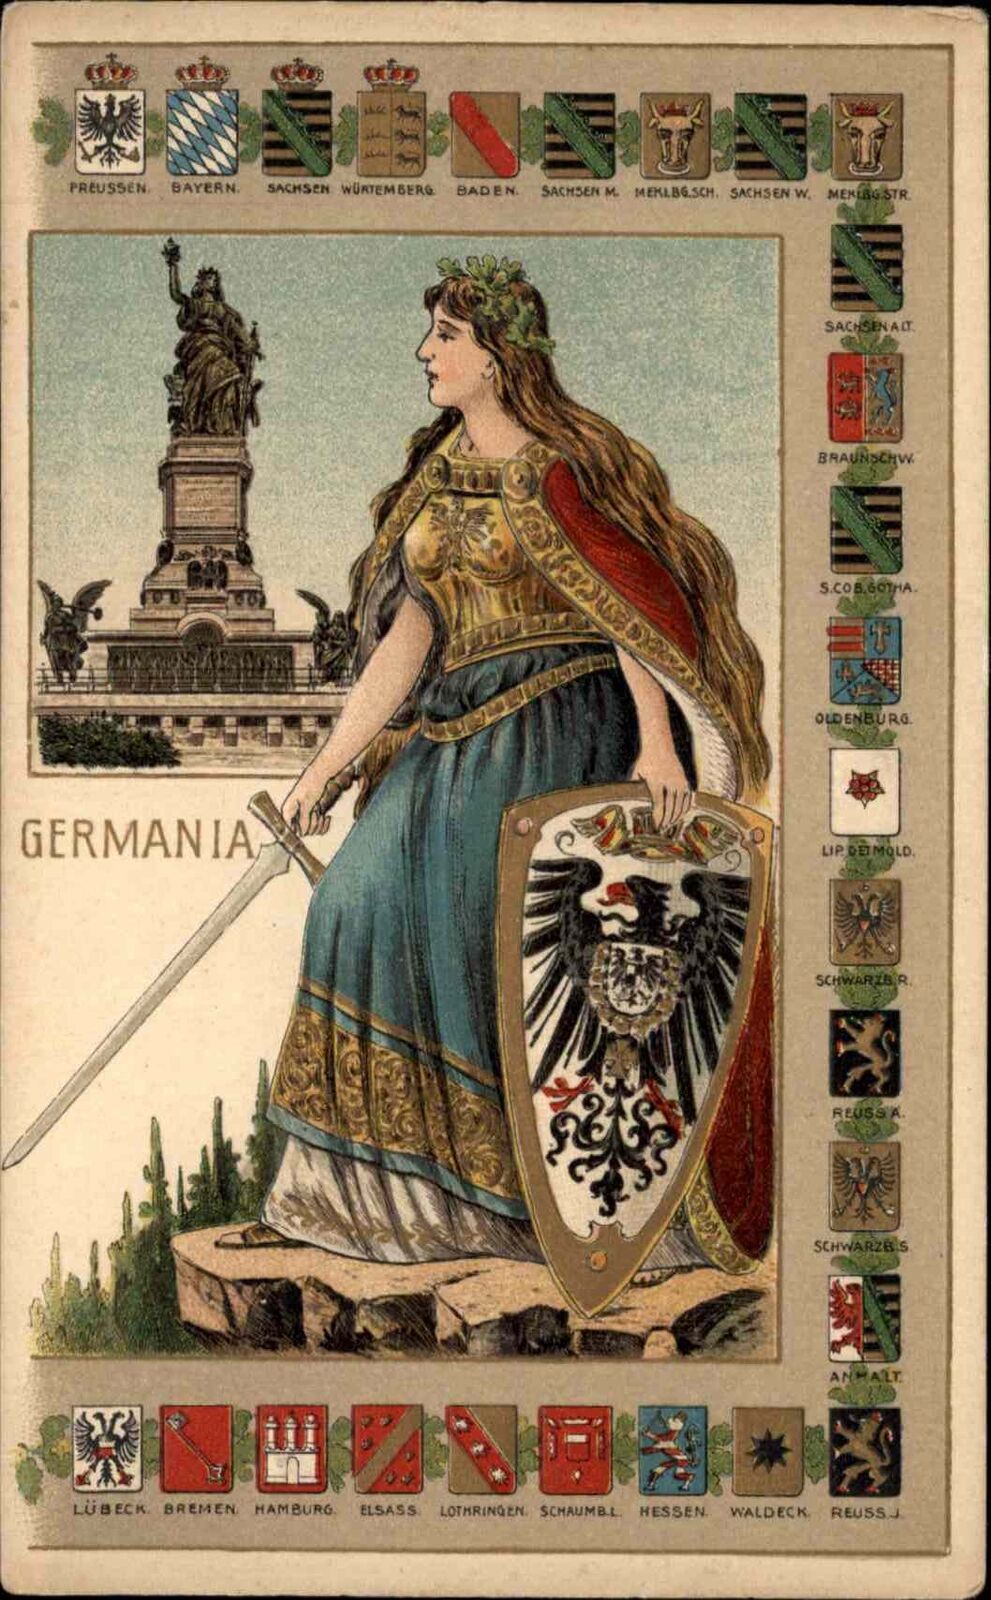 Germania Germany Woman with Shield and Armor Heraldic Emblems c1910 PC